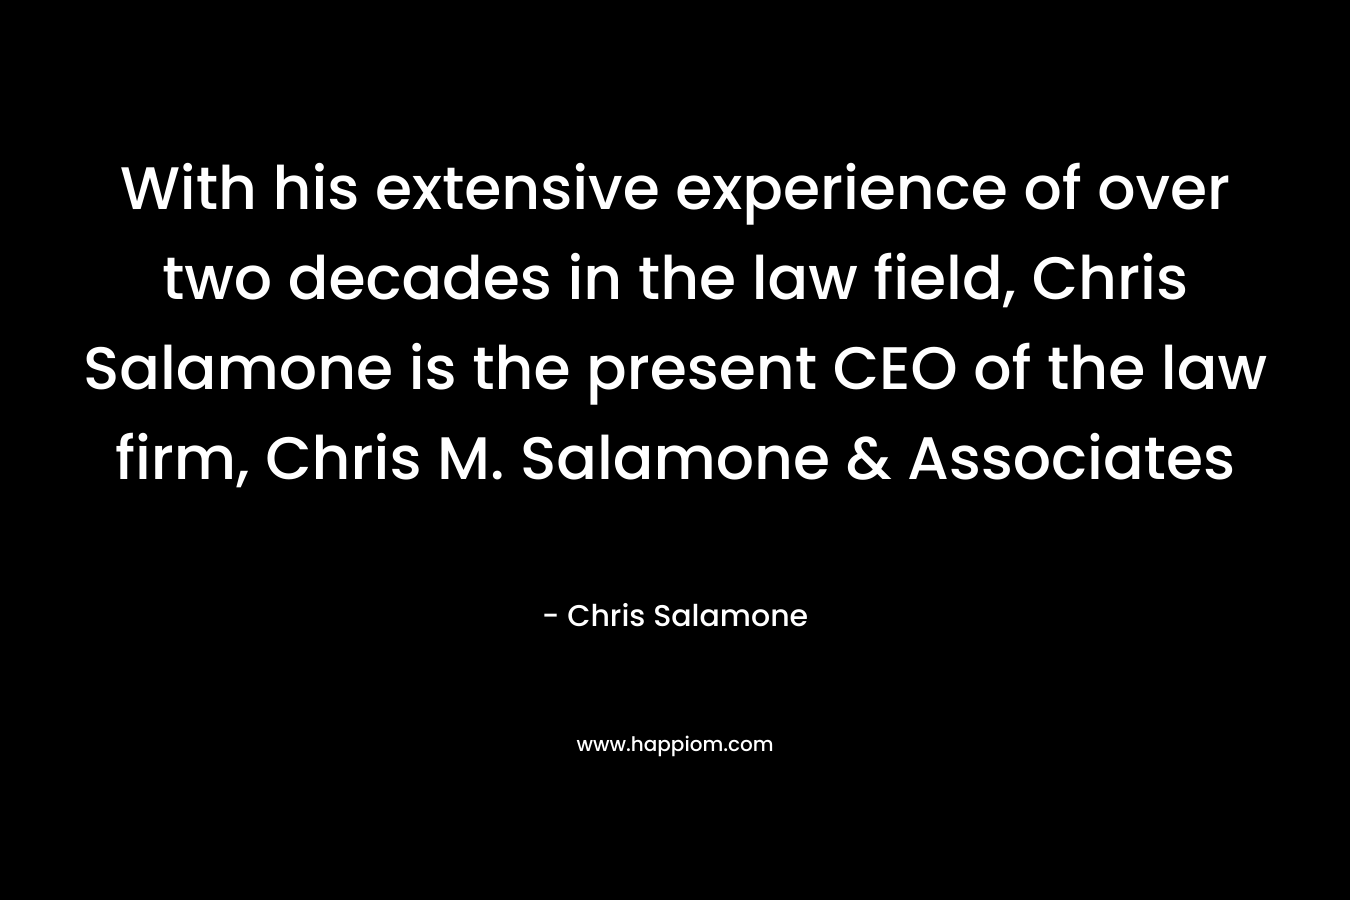 With his extensive experience of over two decades in the law field, Chris Salamone is the present CEO of the law firm, Chris M. Salamone & Associates